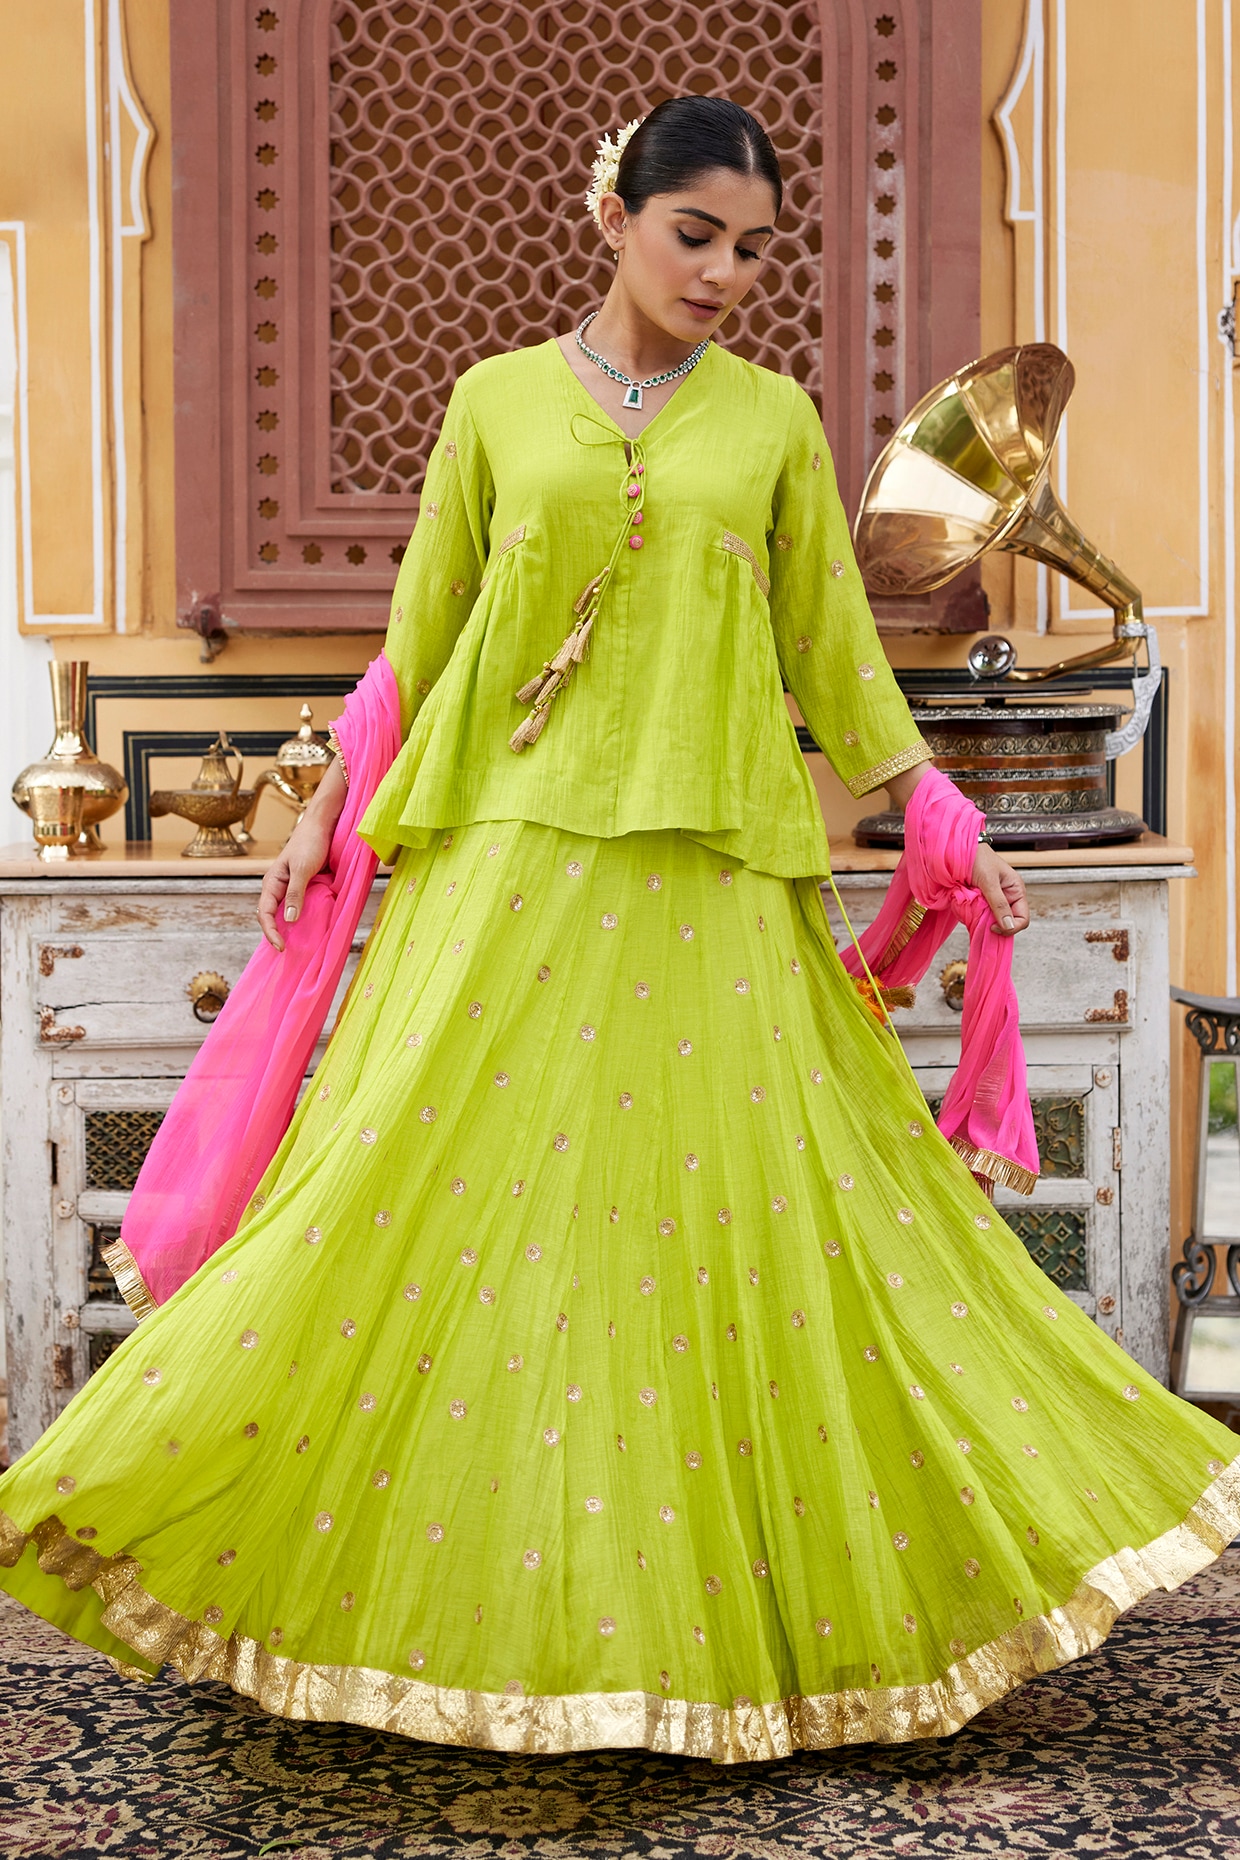 Green Bridal Lehenga - Buy Green Bridal Lehenga Online Starting at Just  ₹283 | Meesho